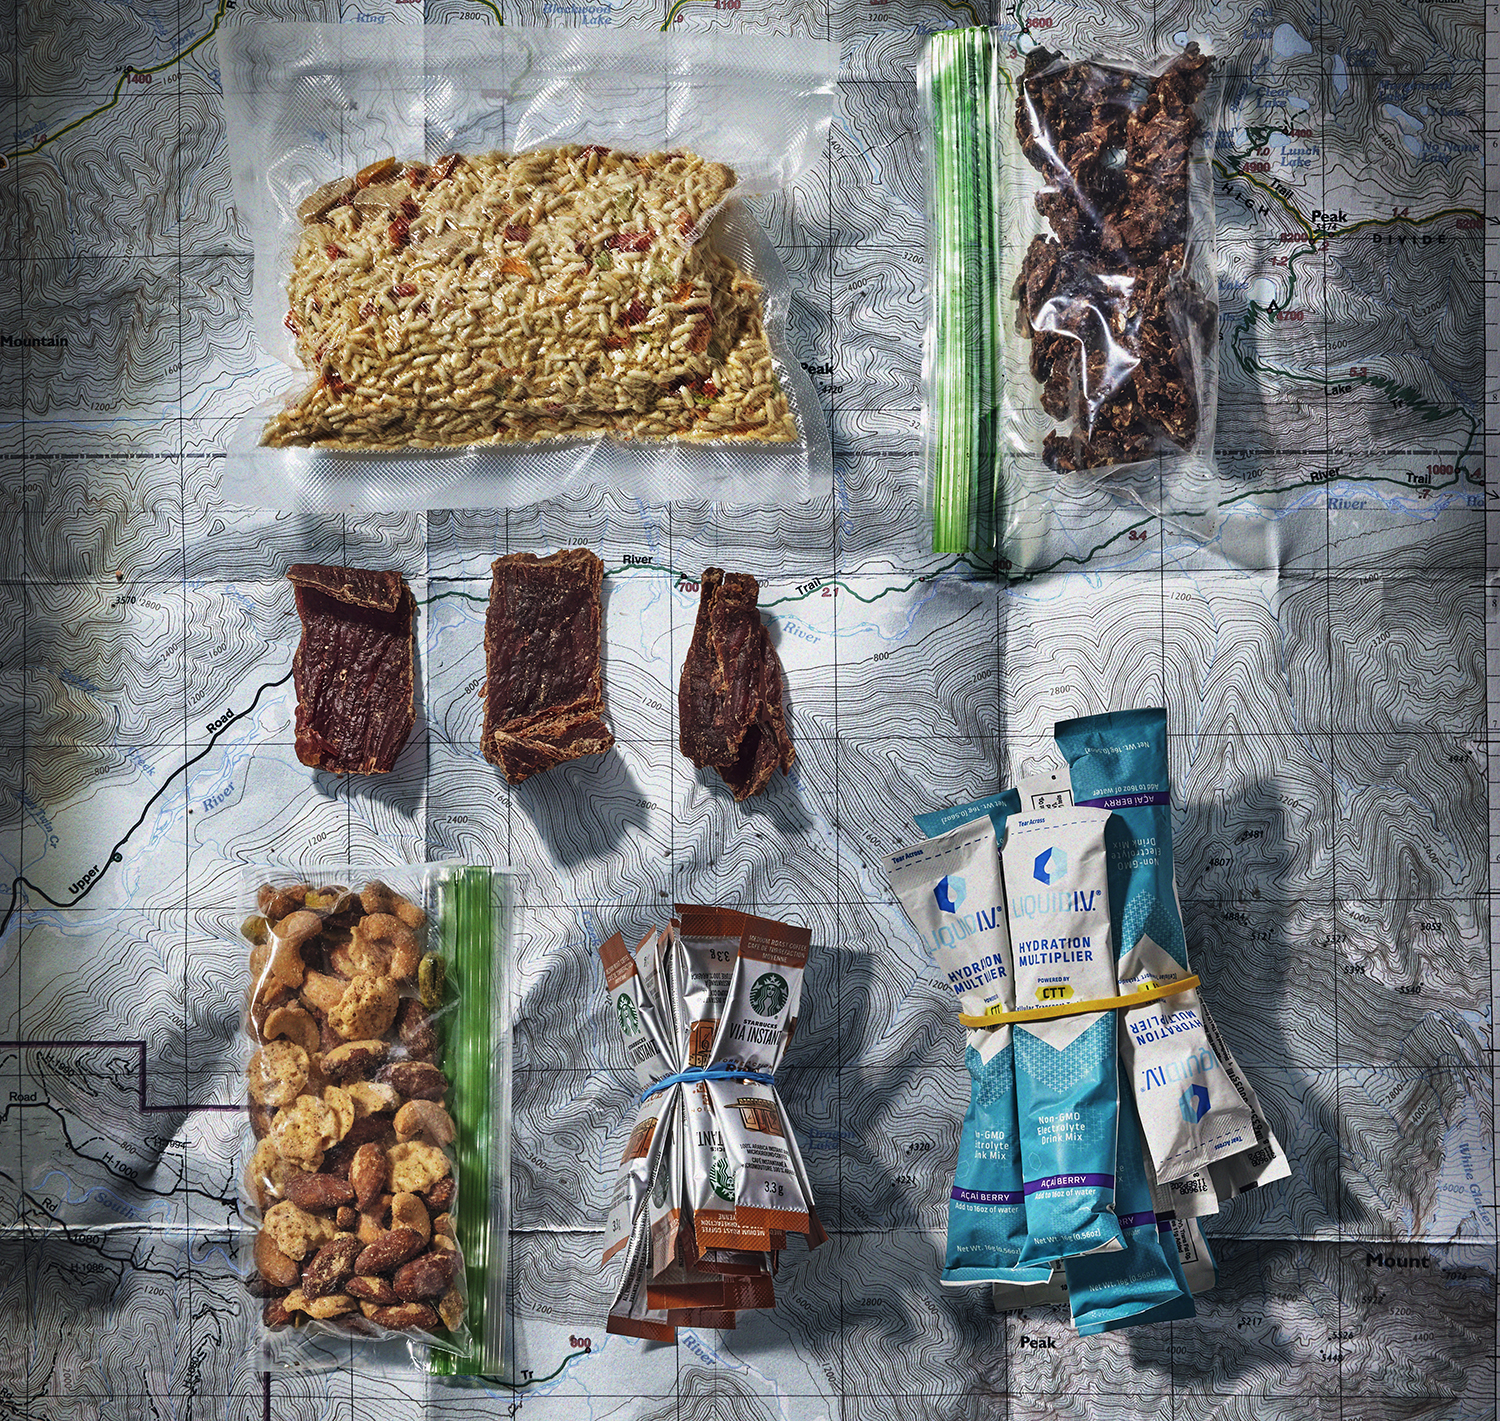 Dried food travels well on long-term hunts